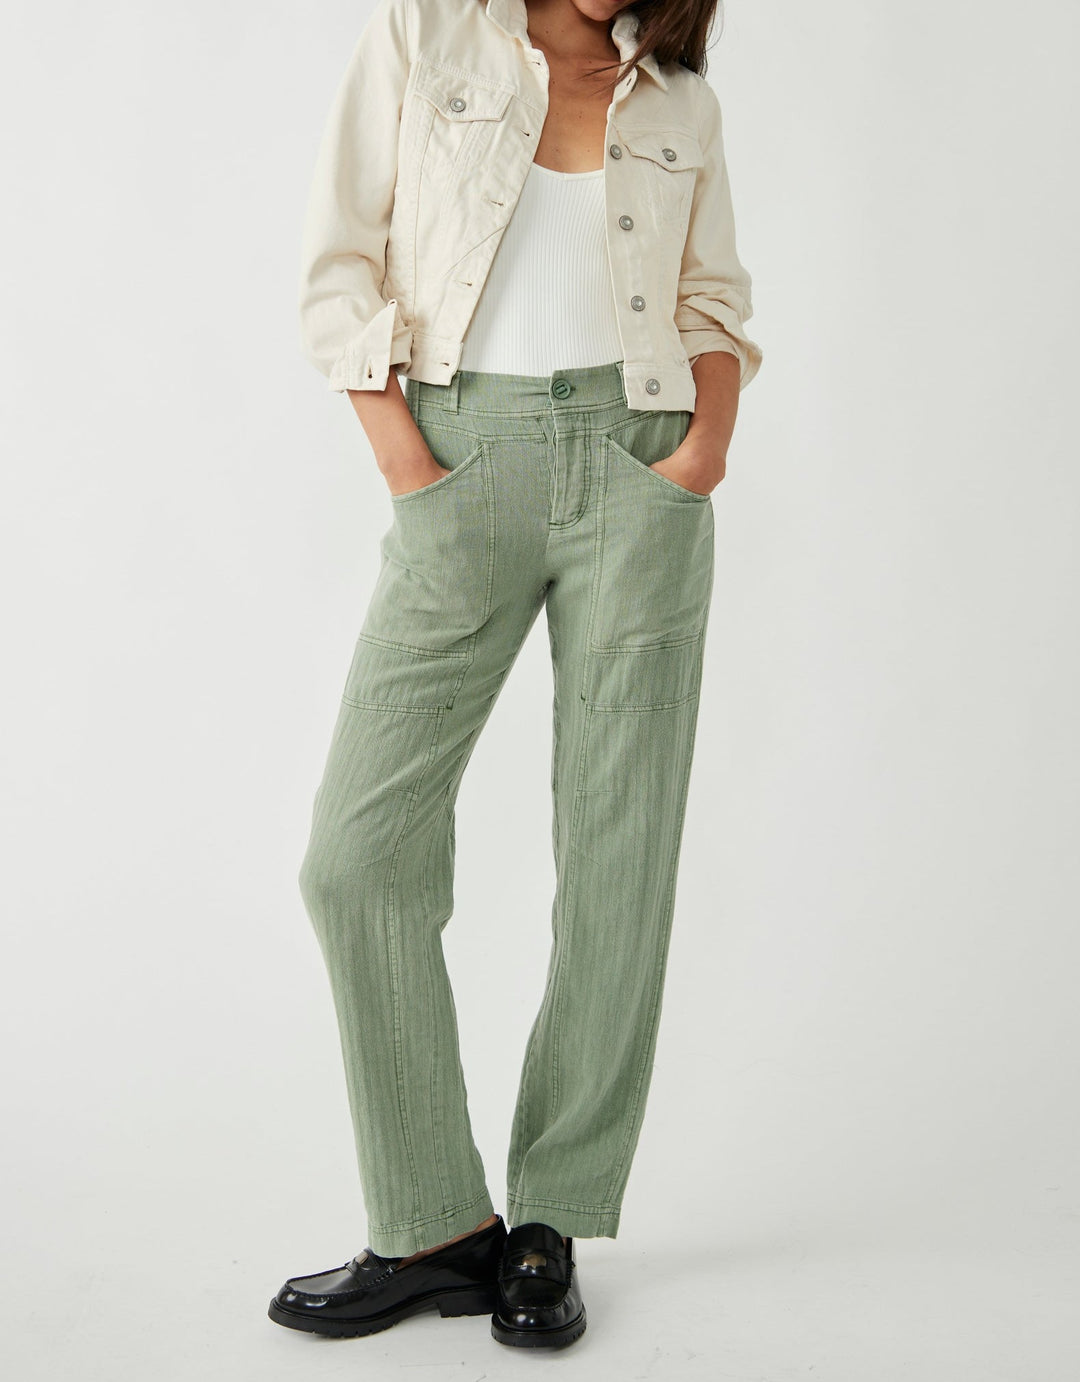 BIG HIT SLOUCH PANT - OLIVE GREEN